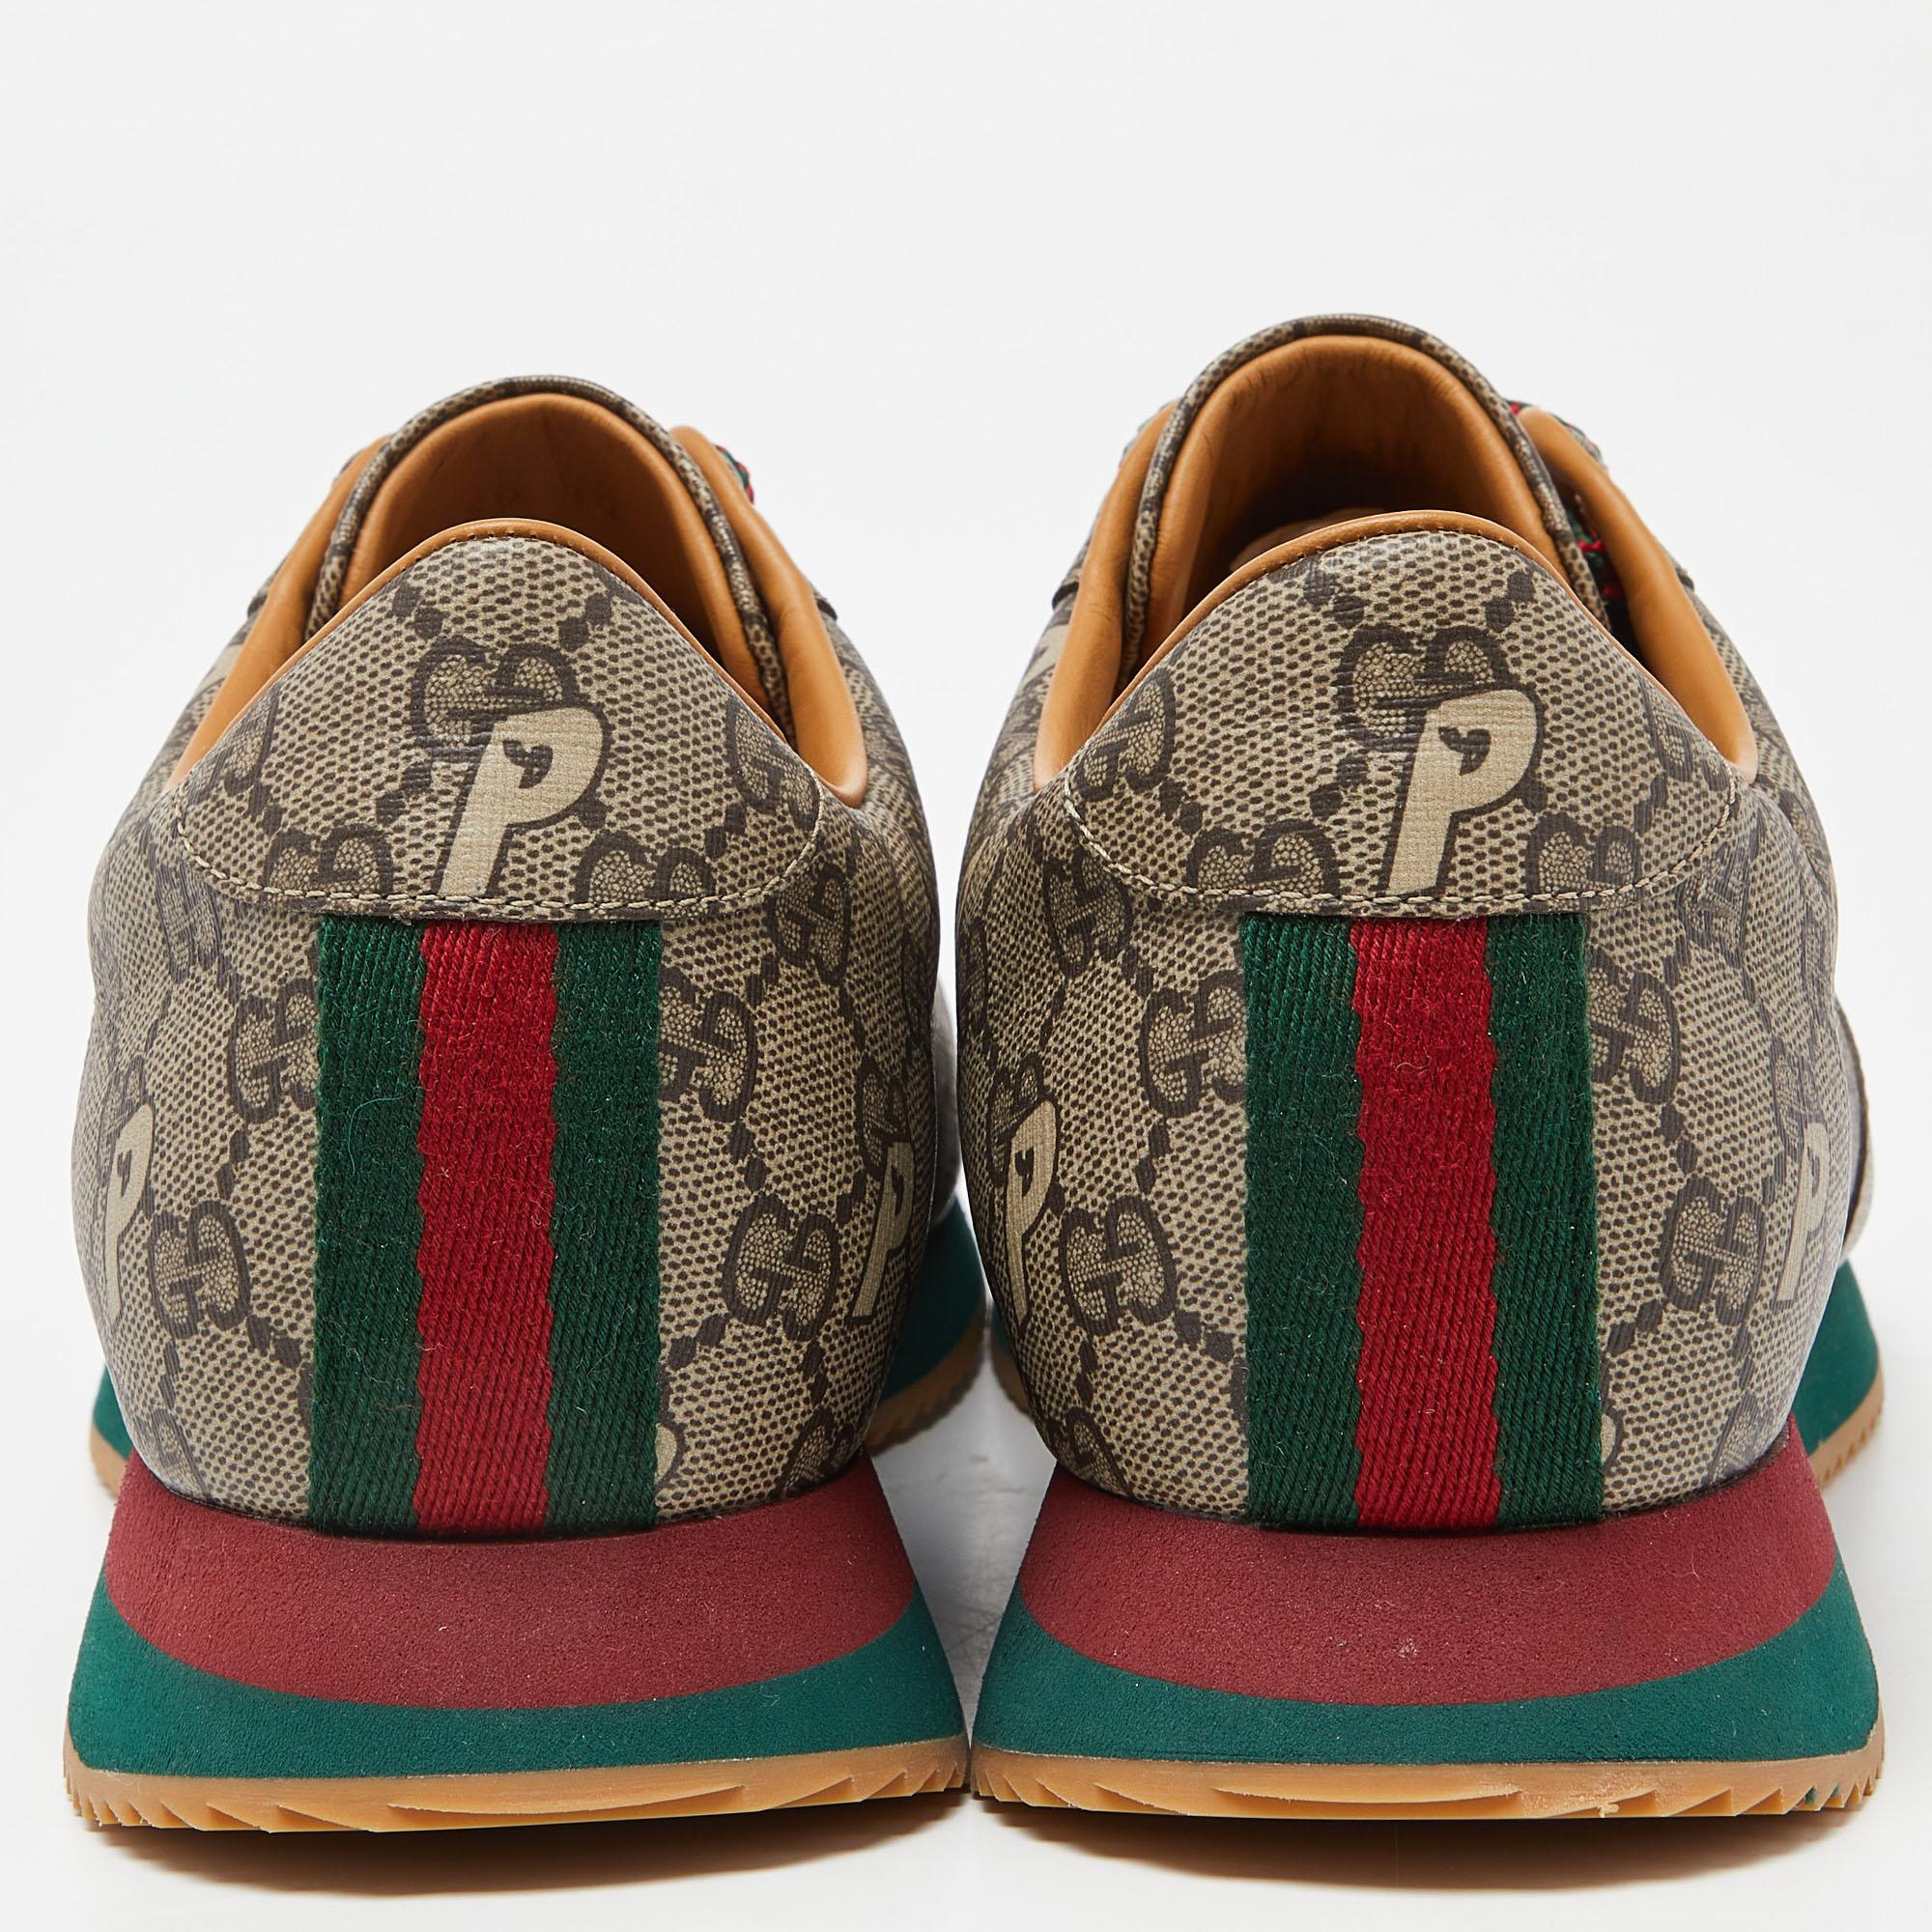 Gucci x Palace Brown GG Supreme Canvas and Leather Sneakers Size 44 2